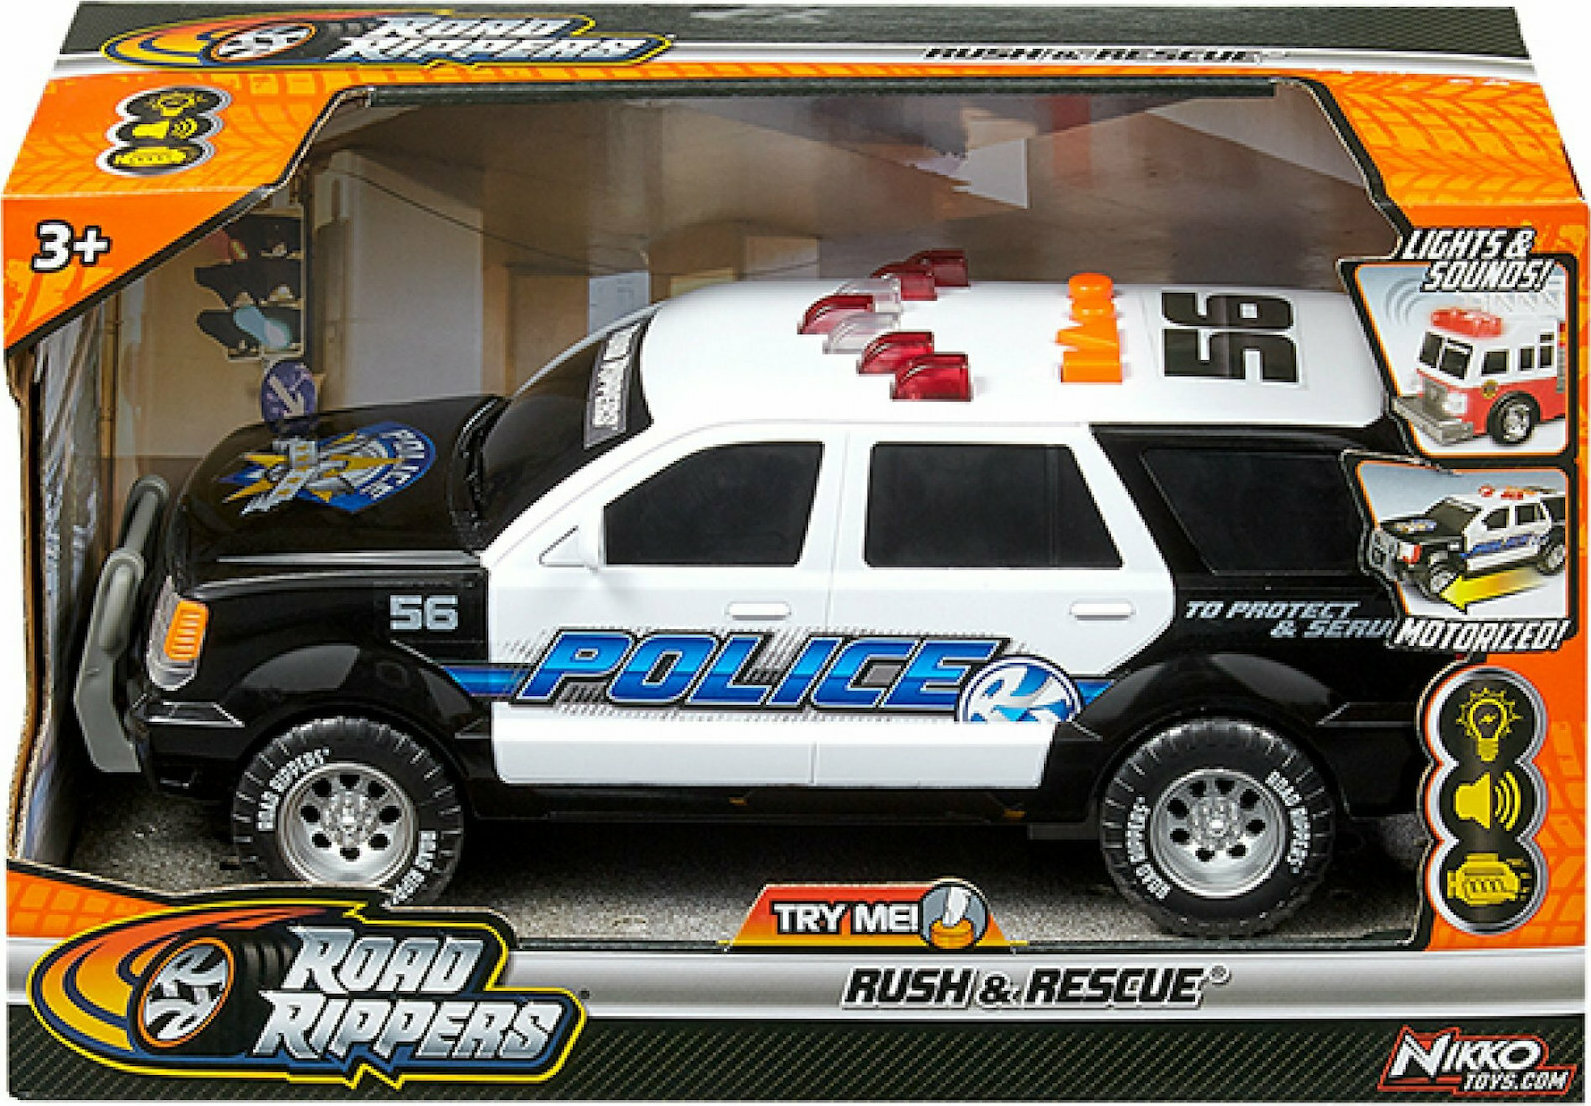 Road Rippers -rush & Rescue- Police Suv